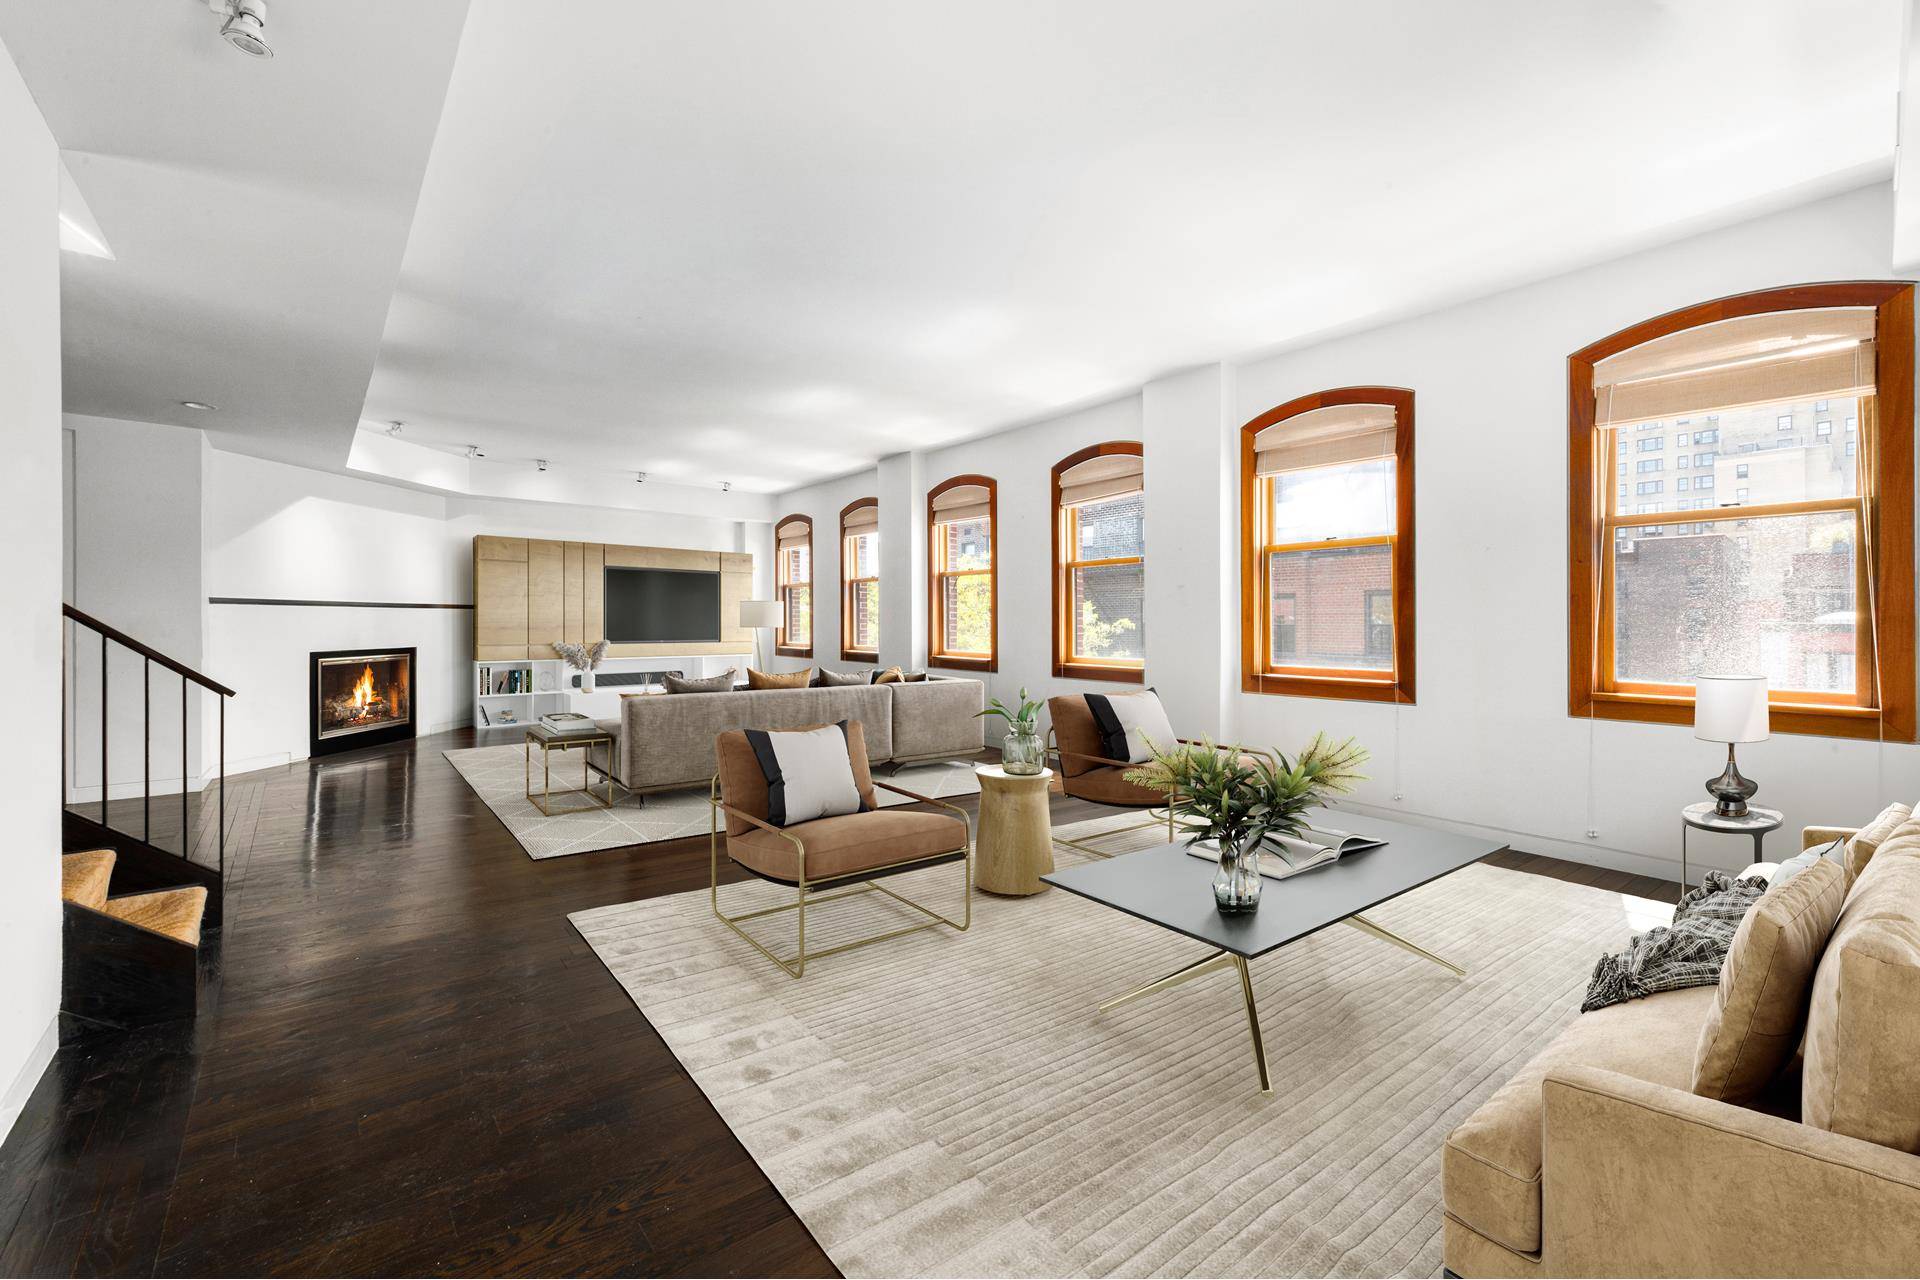 Nestled in the West Village in an intimate boutique brick condo building rests this gorgeous, expansive penthouse duplex apartment boasting 1, 500 square feet of outdoor space that includes a ...